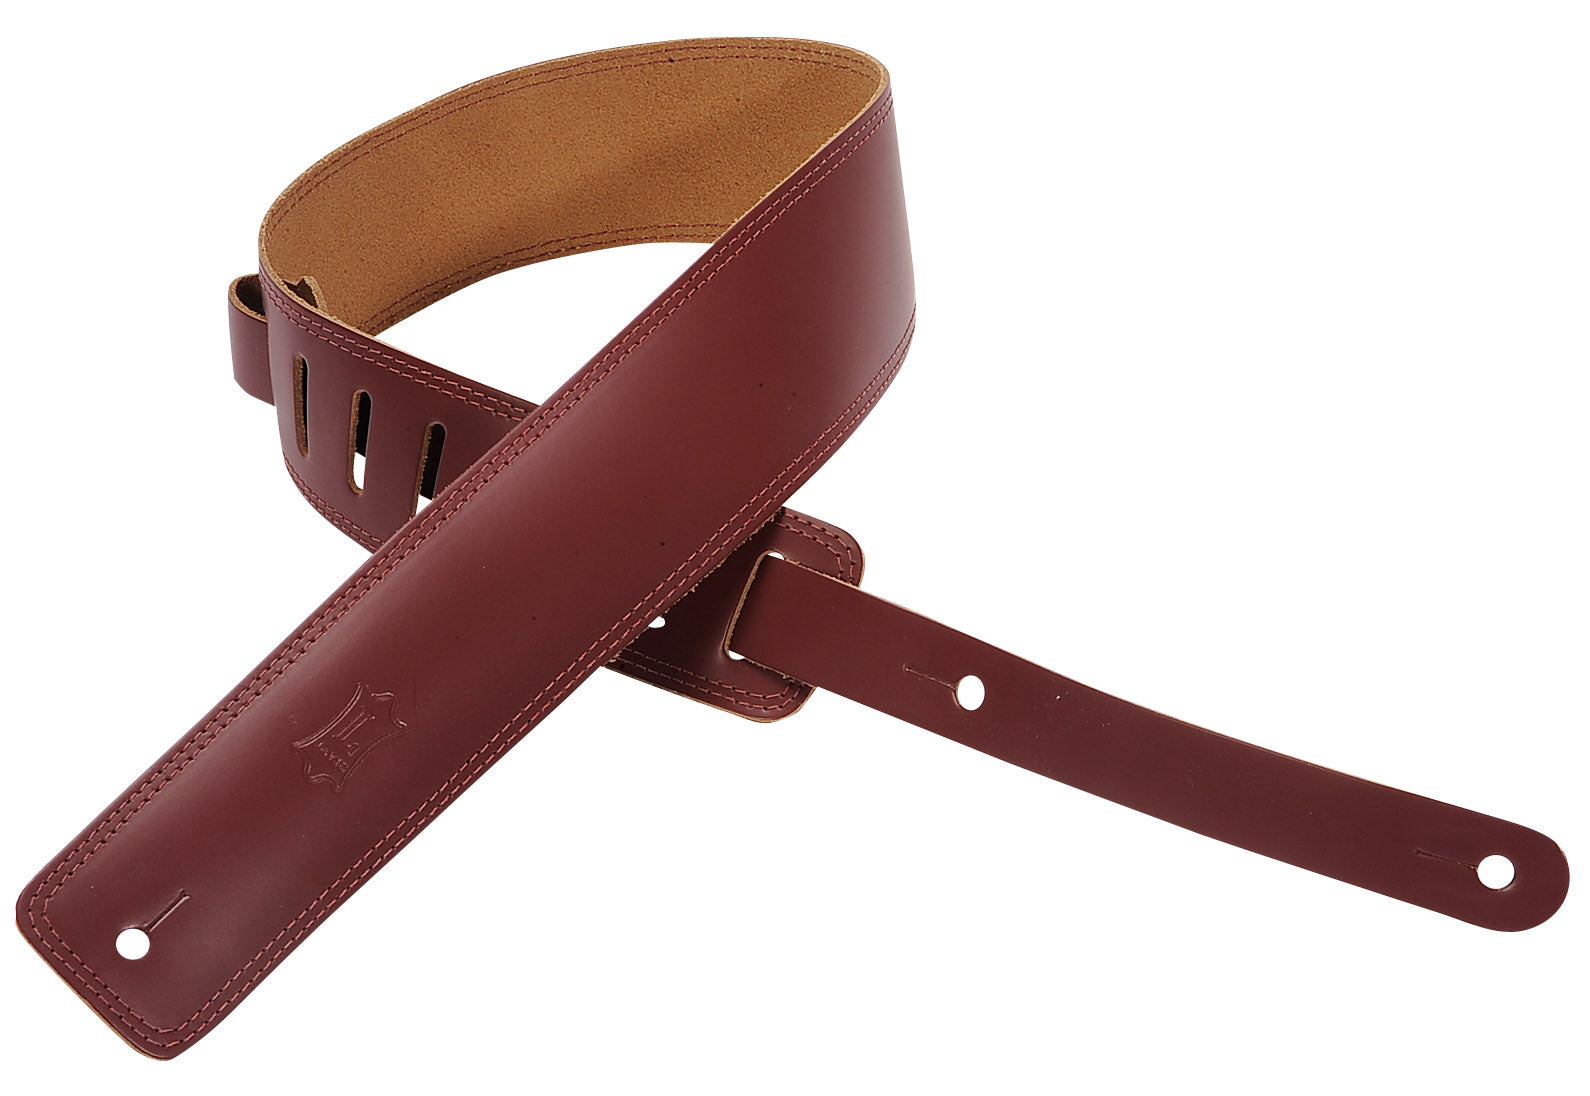 LEVY'S 2.5" LEATHER GUITAR STRAP WITH DOUBLE STITCH BURGANDY